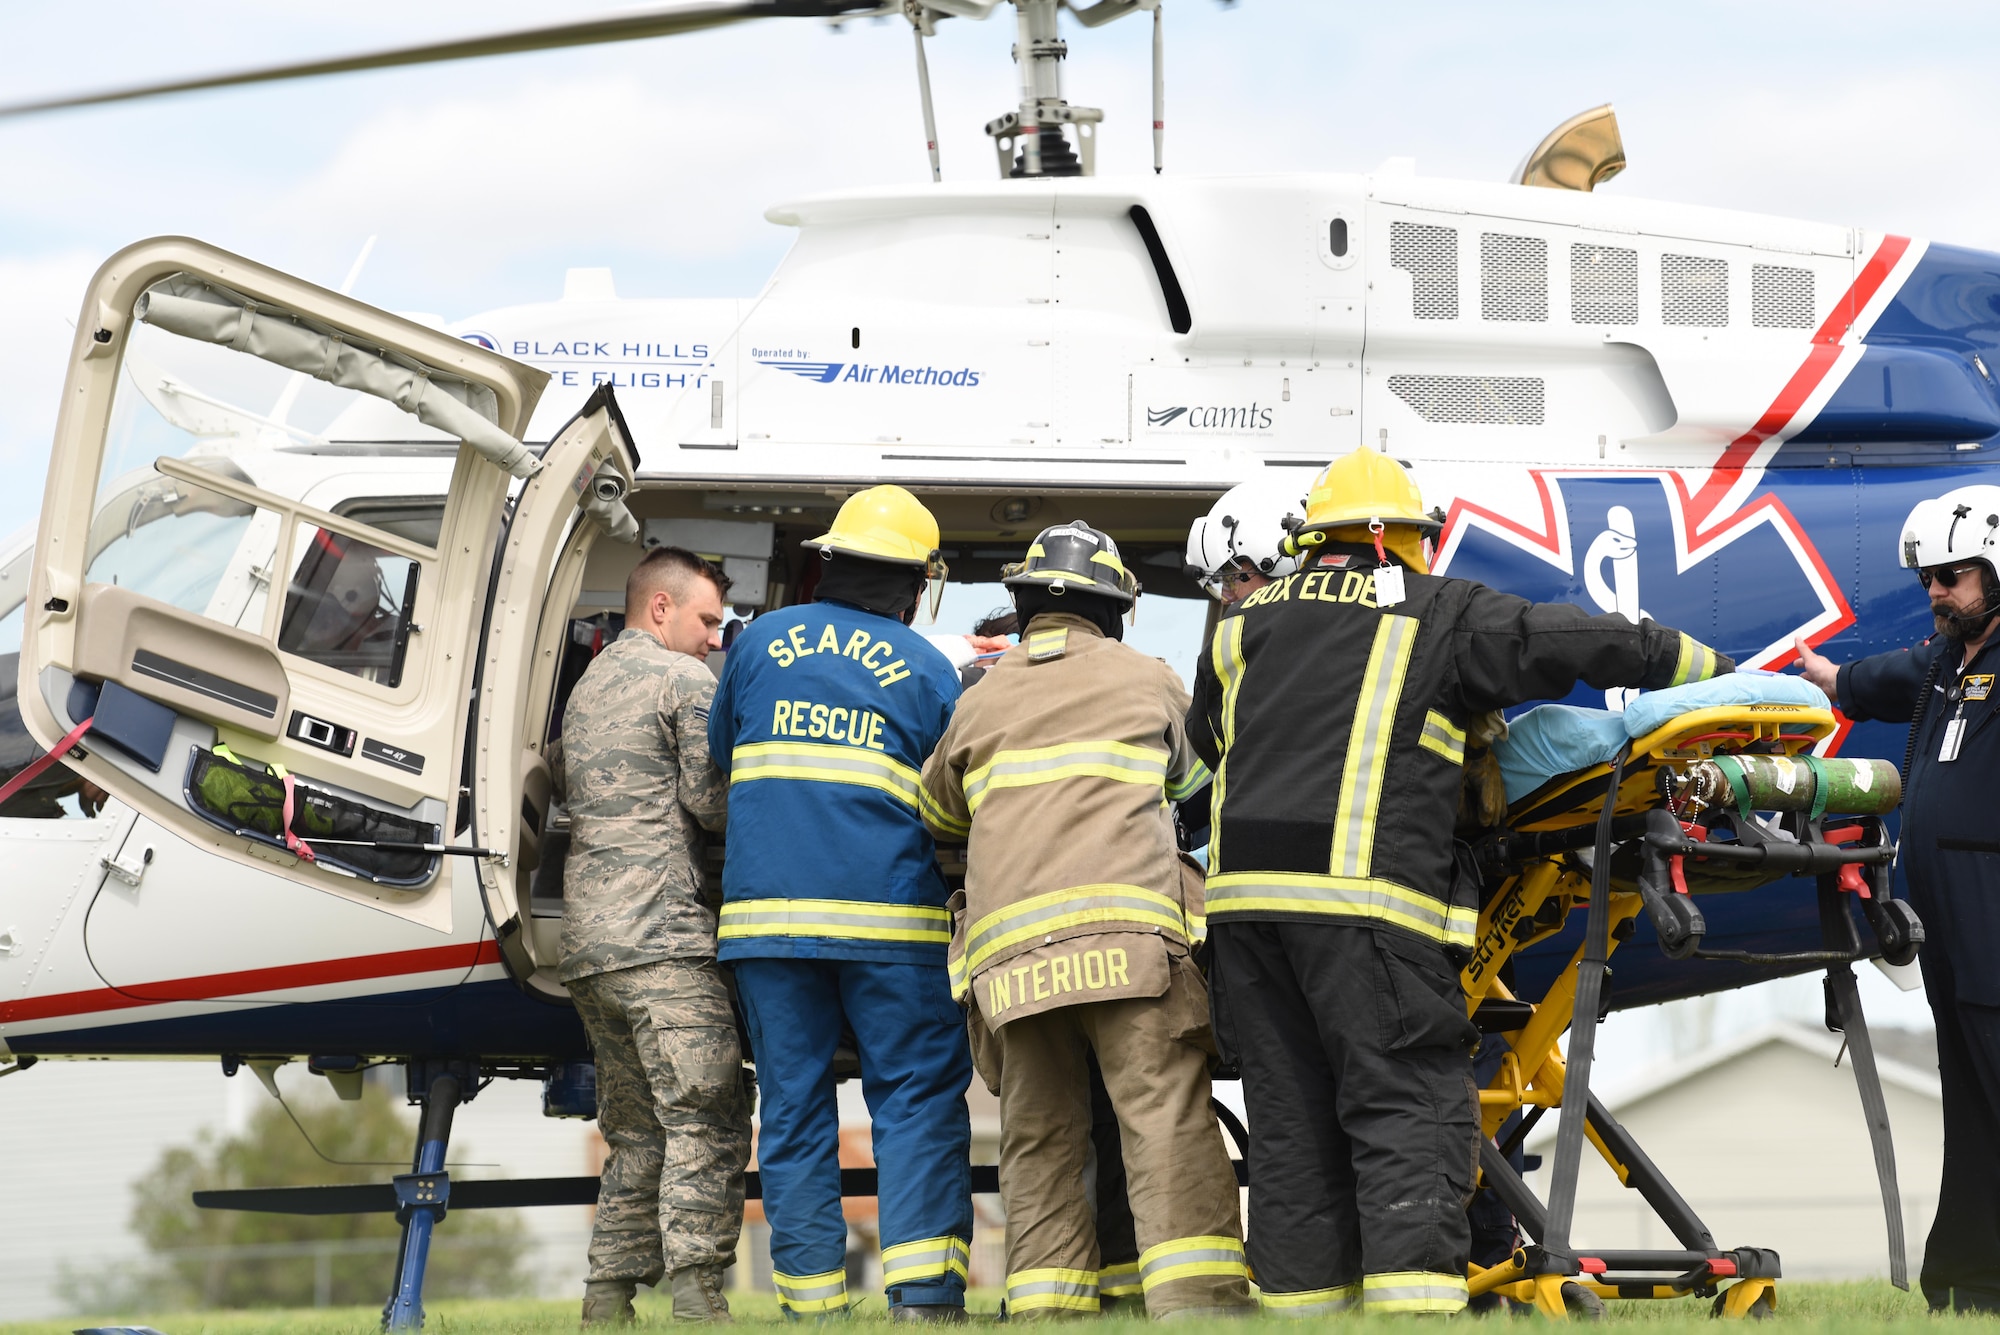 A student performer is loaded in to a medical helicopter during Douglas High School’s Freshman Impact in Box Elder S.D., May 9, 2018. This event teaches young adults about the dangers of driving under the influence and distracted driving so they can make better decisions behind the wheel. (U.S.  Air Force photo by Airman 1st Class Thomas Karol)